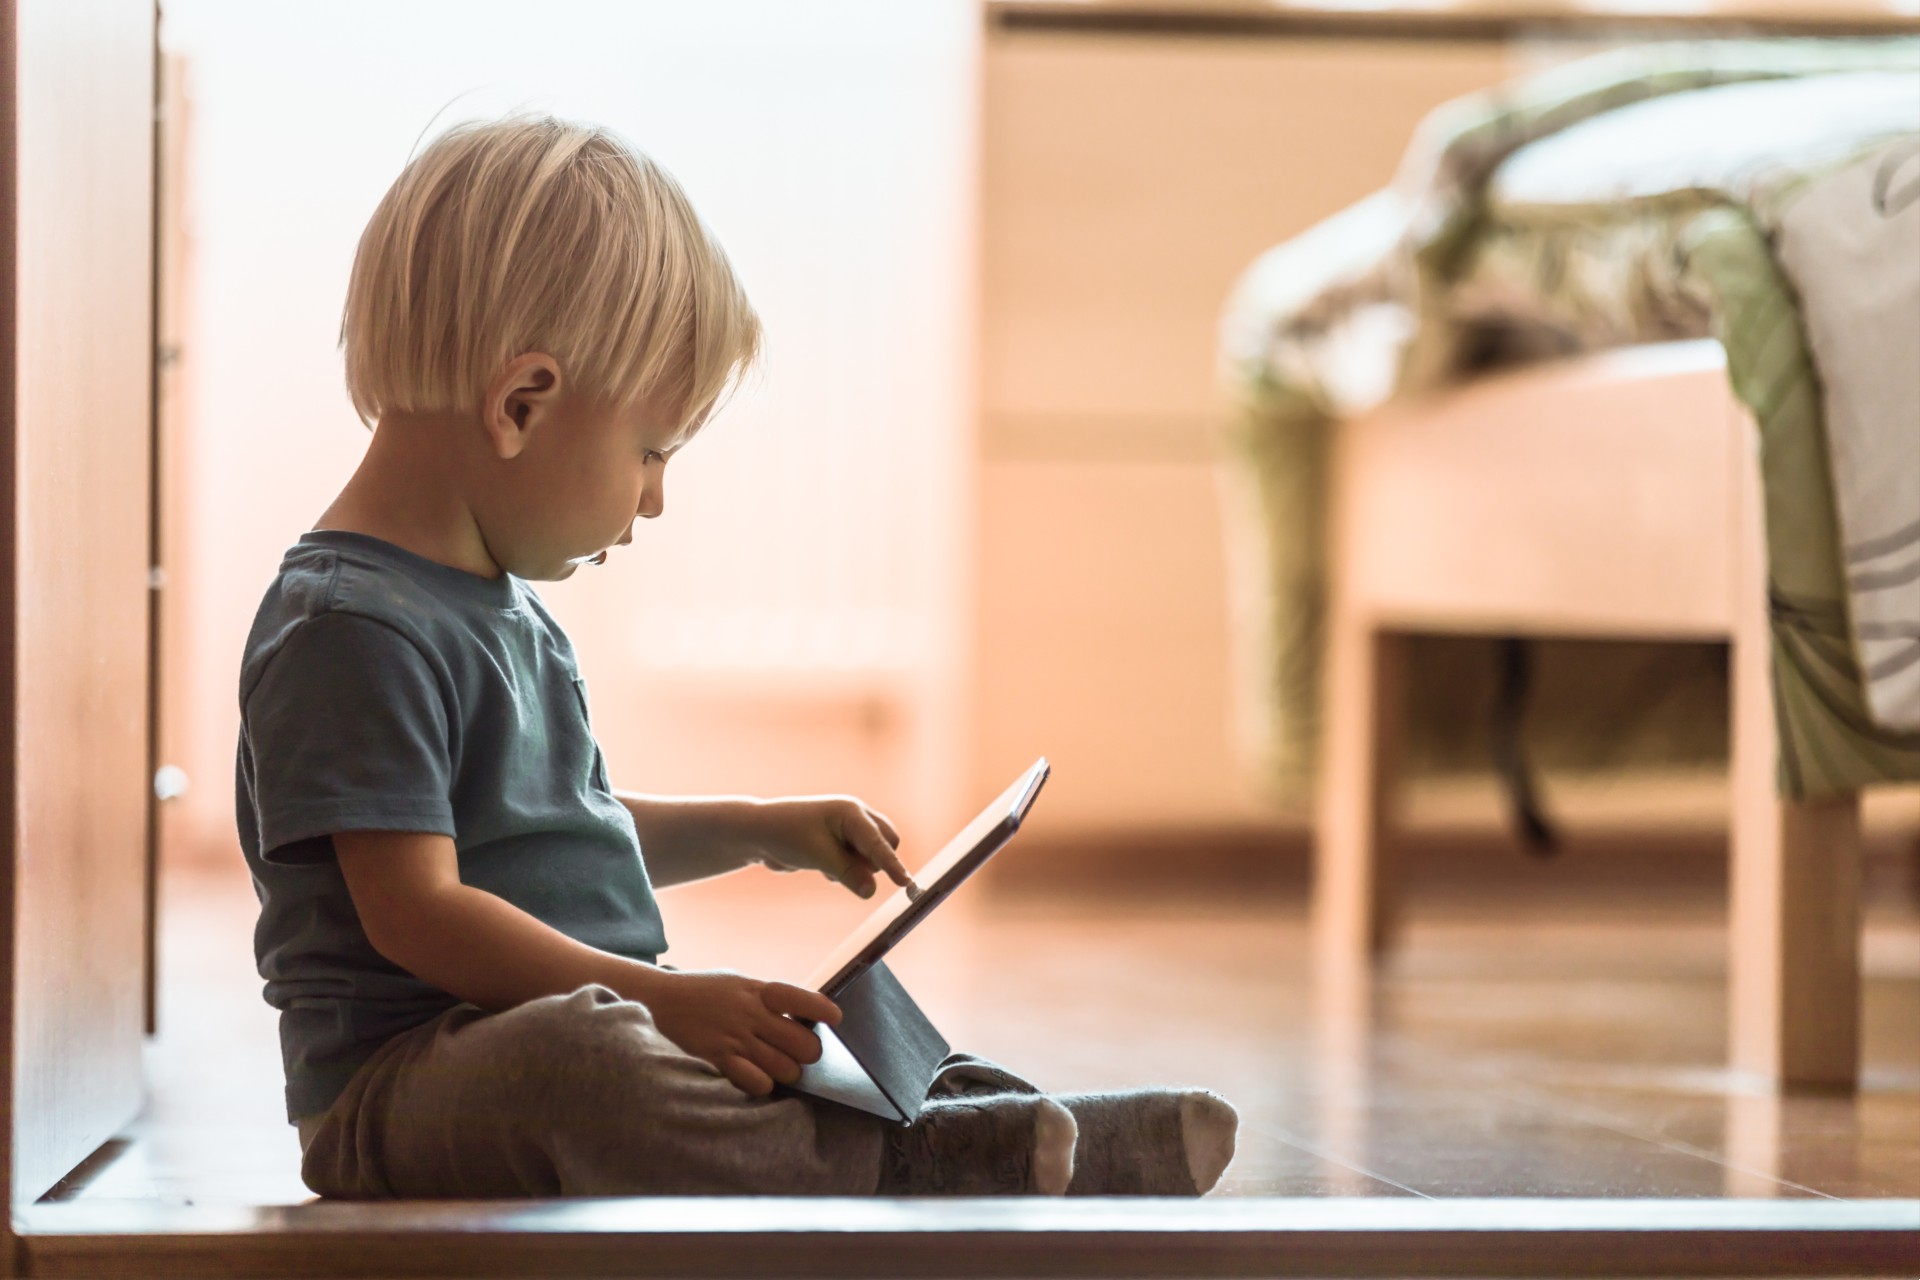 Preschooler looks at a tablet on the floor, begging the question how much screen time should your preschooler be allowed each day?